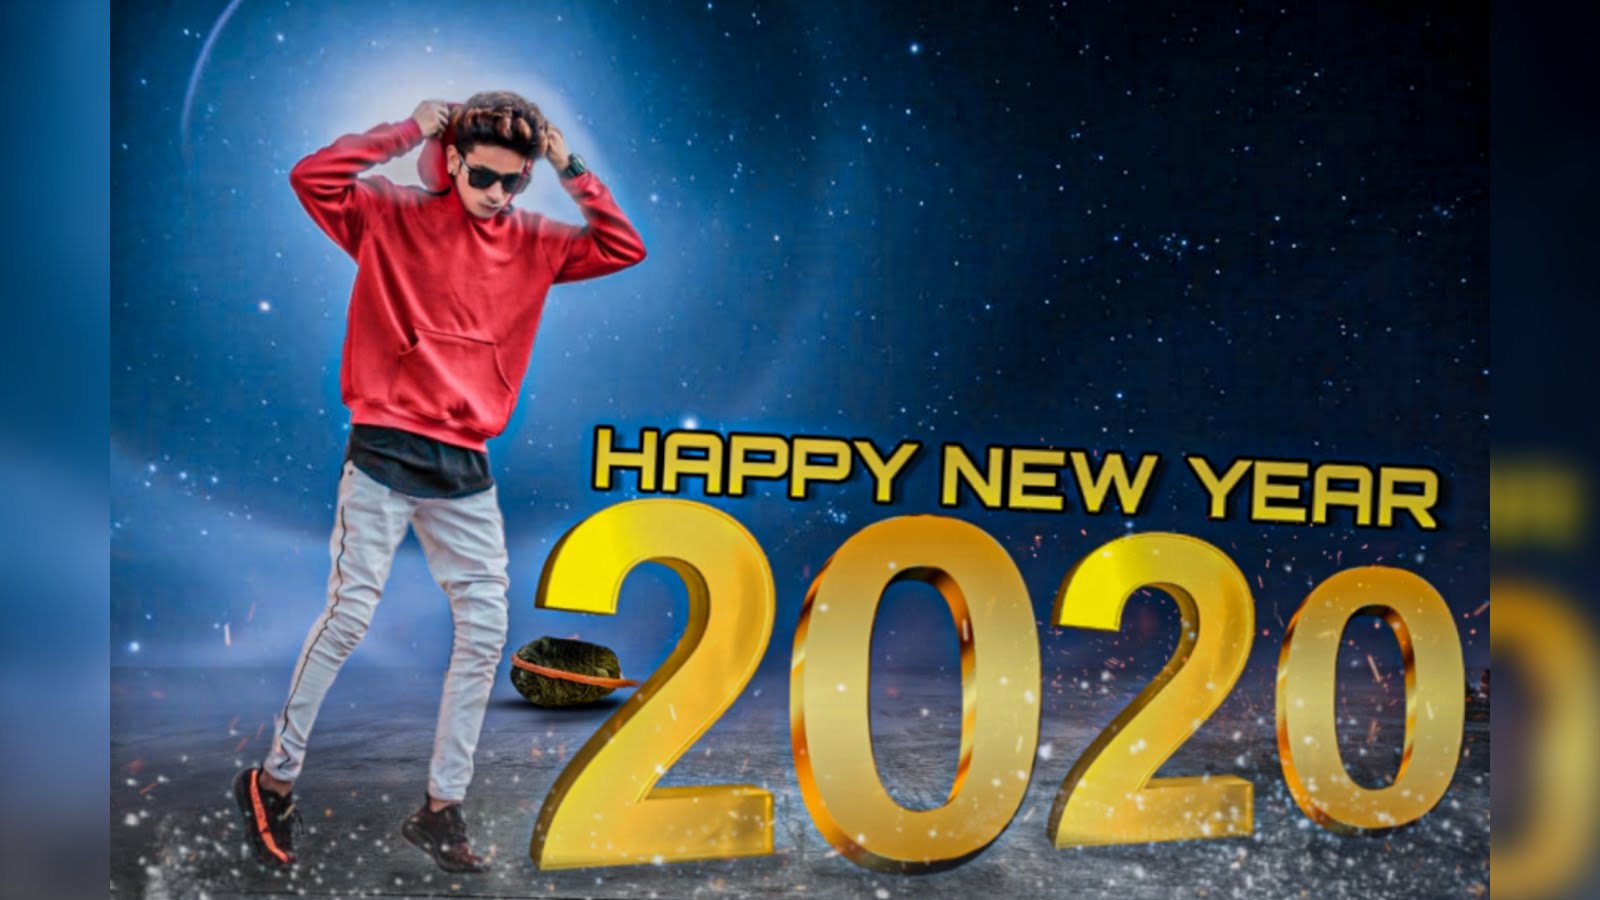 NEW HAPPY NEW YEAR PHOTO EDITING 2020 - LEARNINGWITHSR